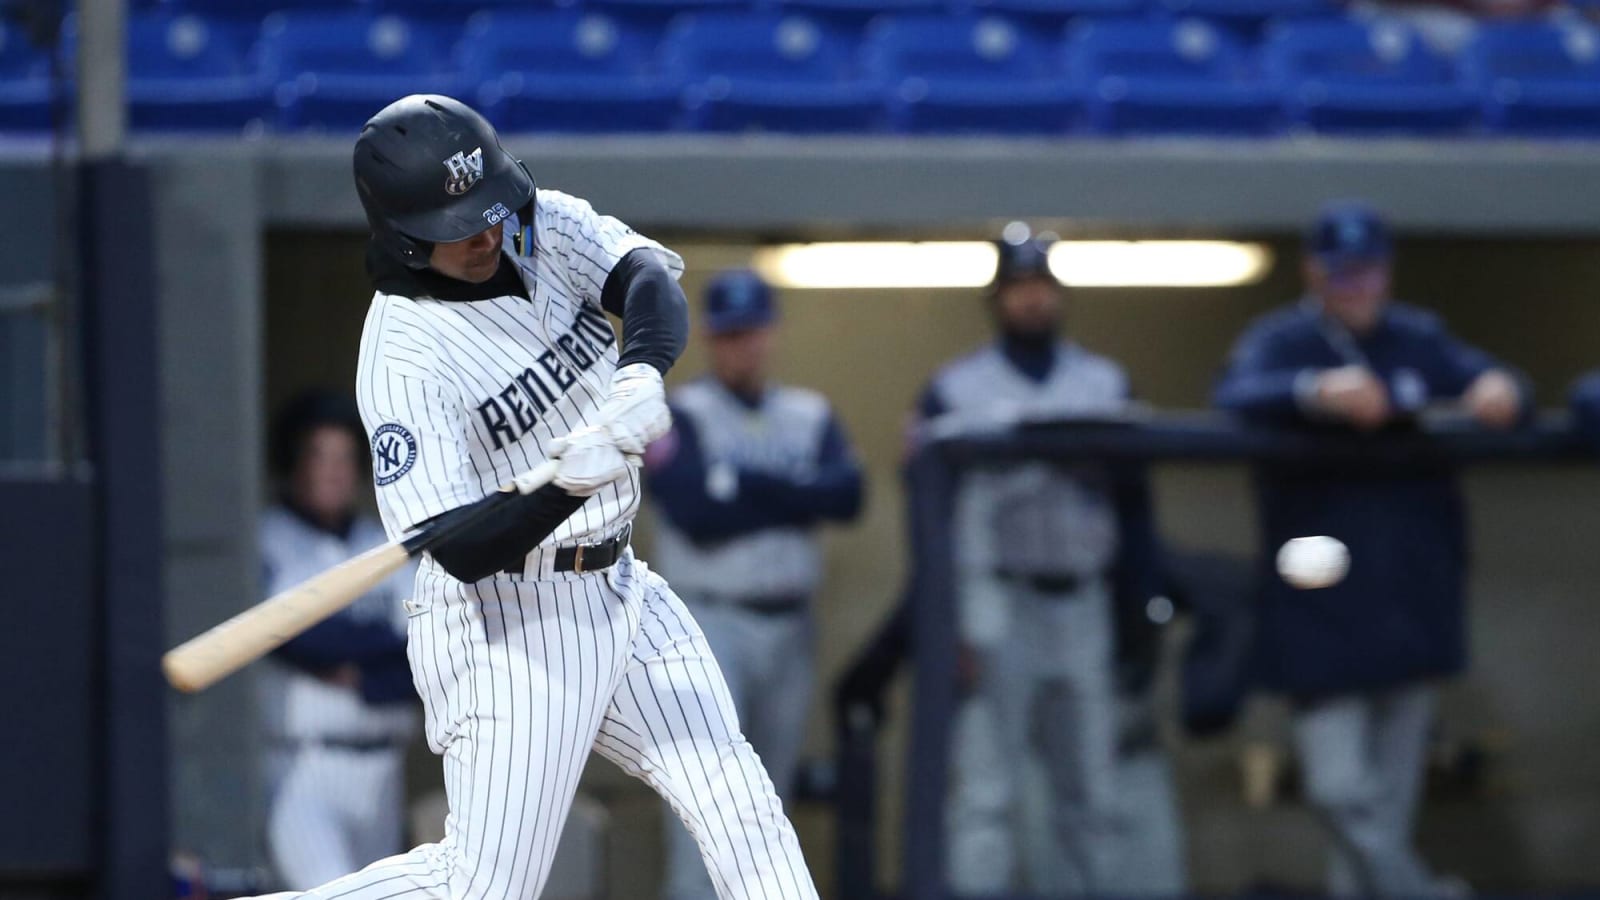 Should the Yankees call up Everson Pereira in 2023?